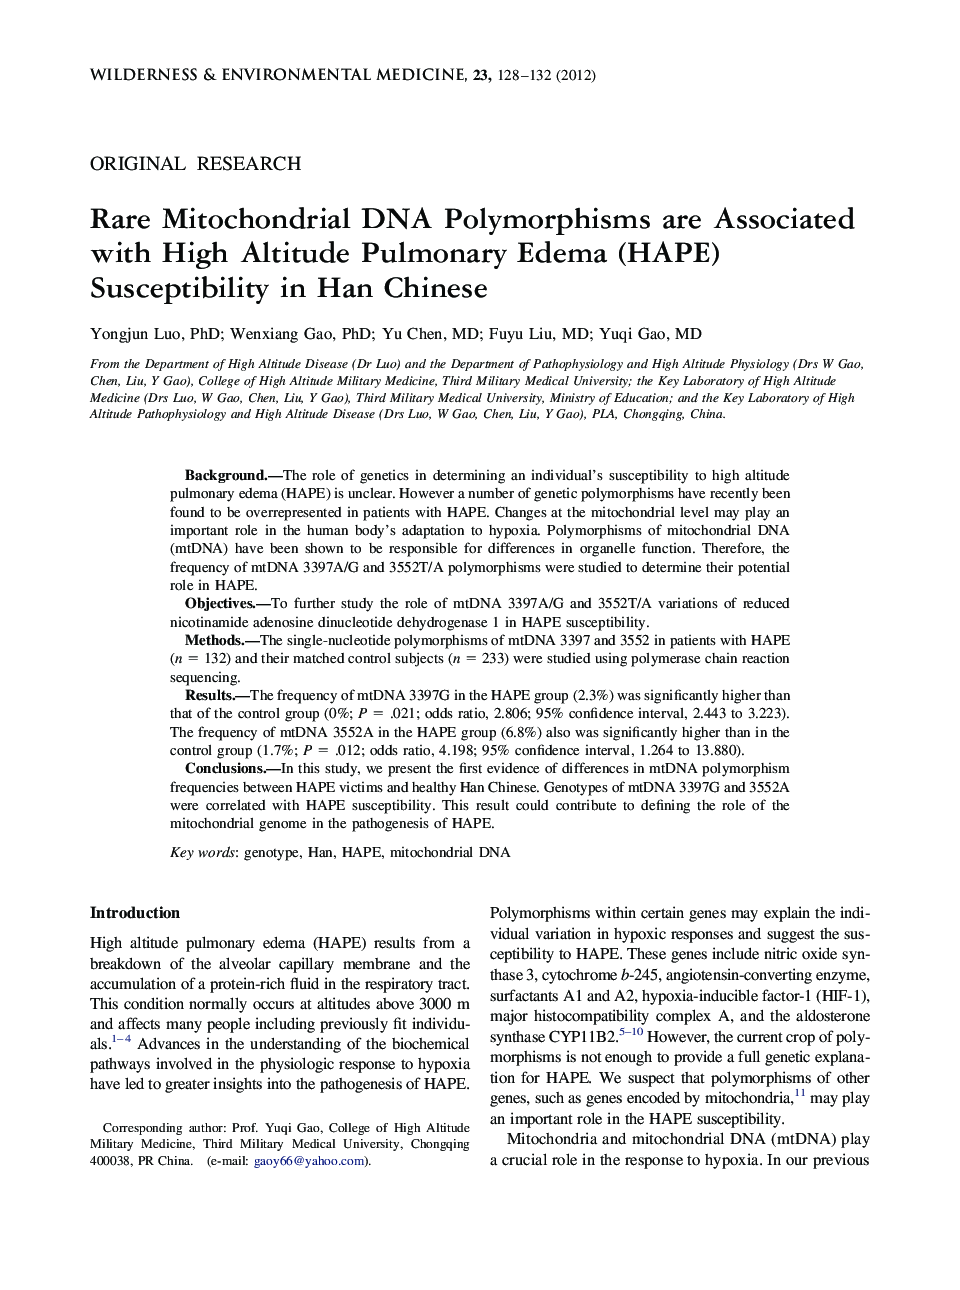 Rare Mitochondrial DNA Polymorphisms are Associated with High Altitude Pulmonary Edema (HAPE) Susceptibility in Han Chinese